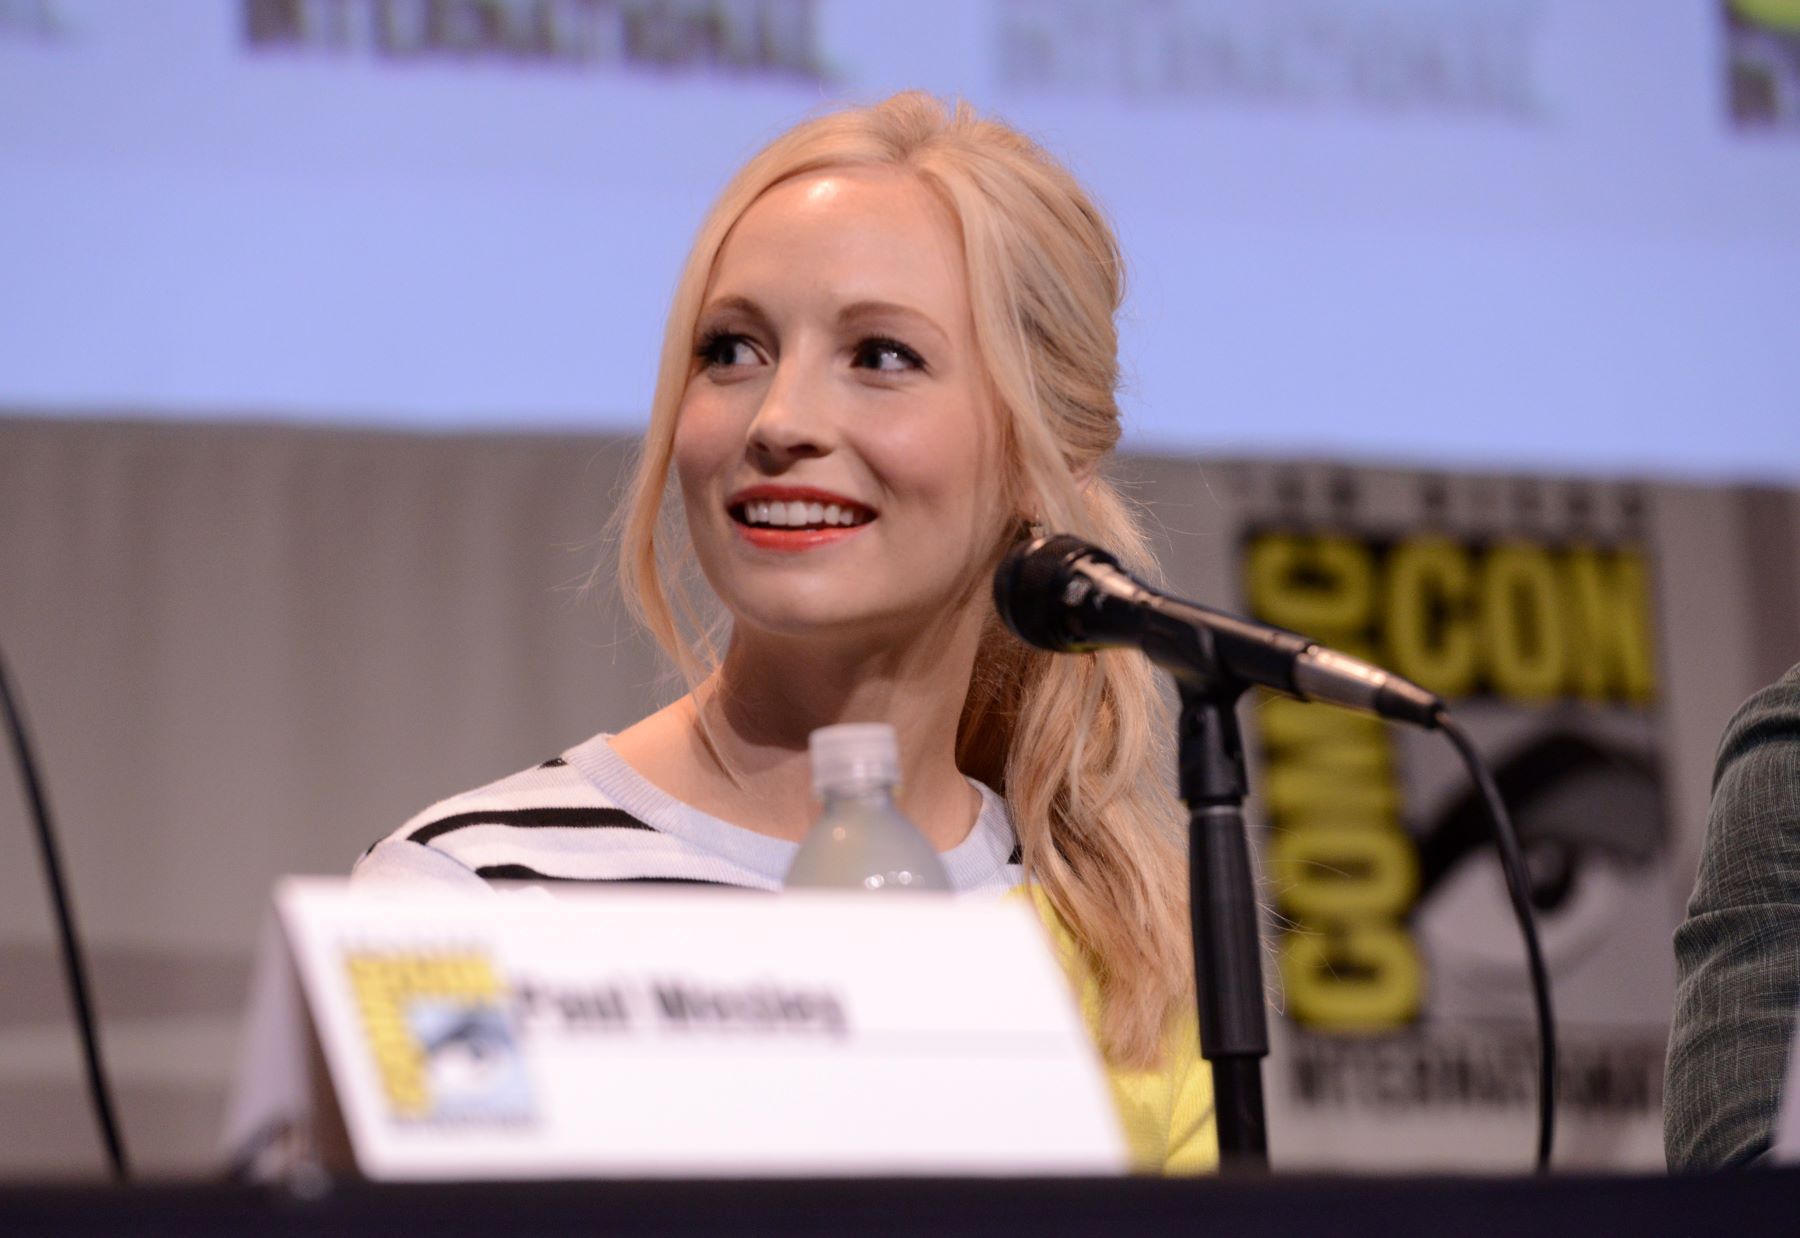 Candice King on a 'The Vampire Diaries' Comic-Con International 2015 panel in San Diego, California